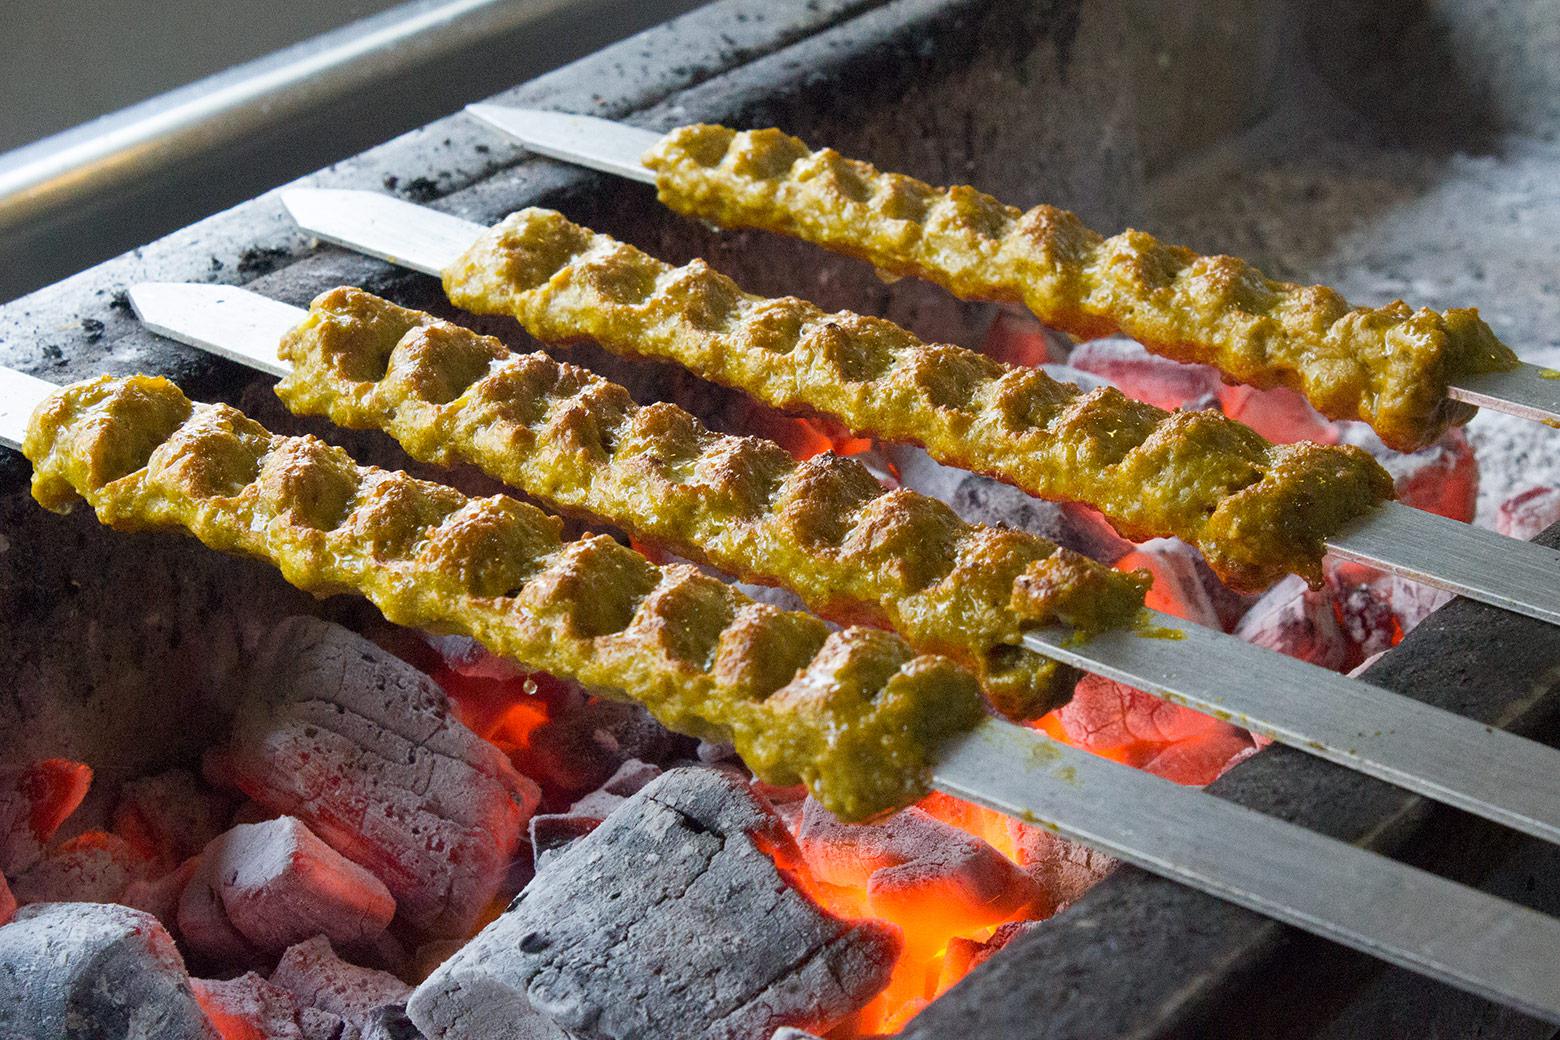 Kebabs on the grill.